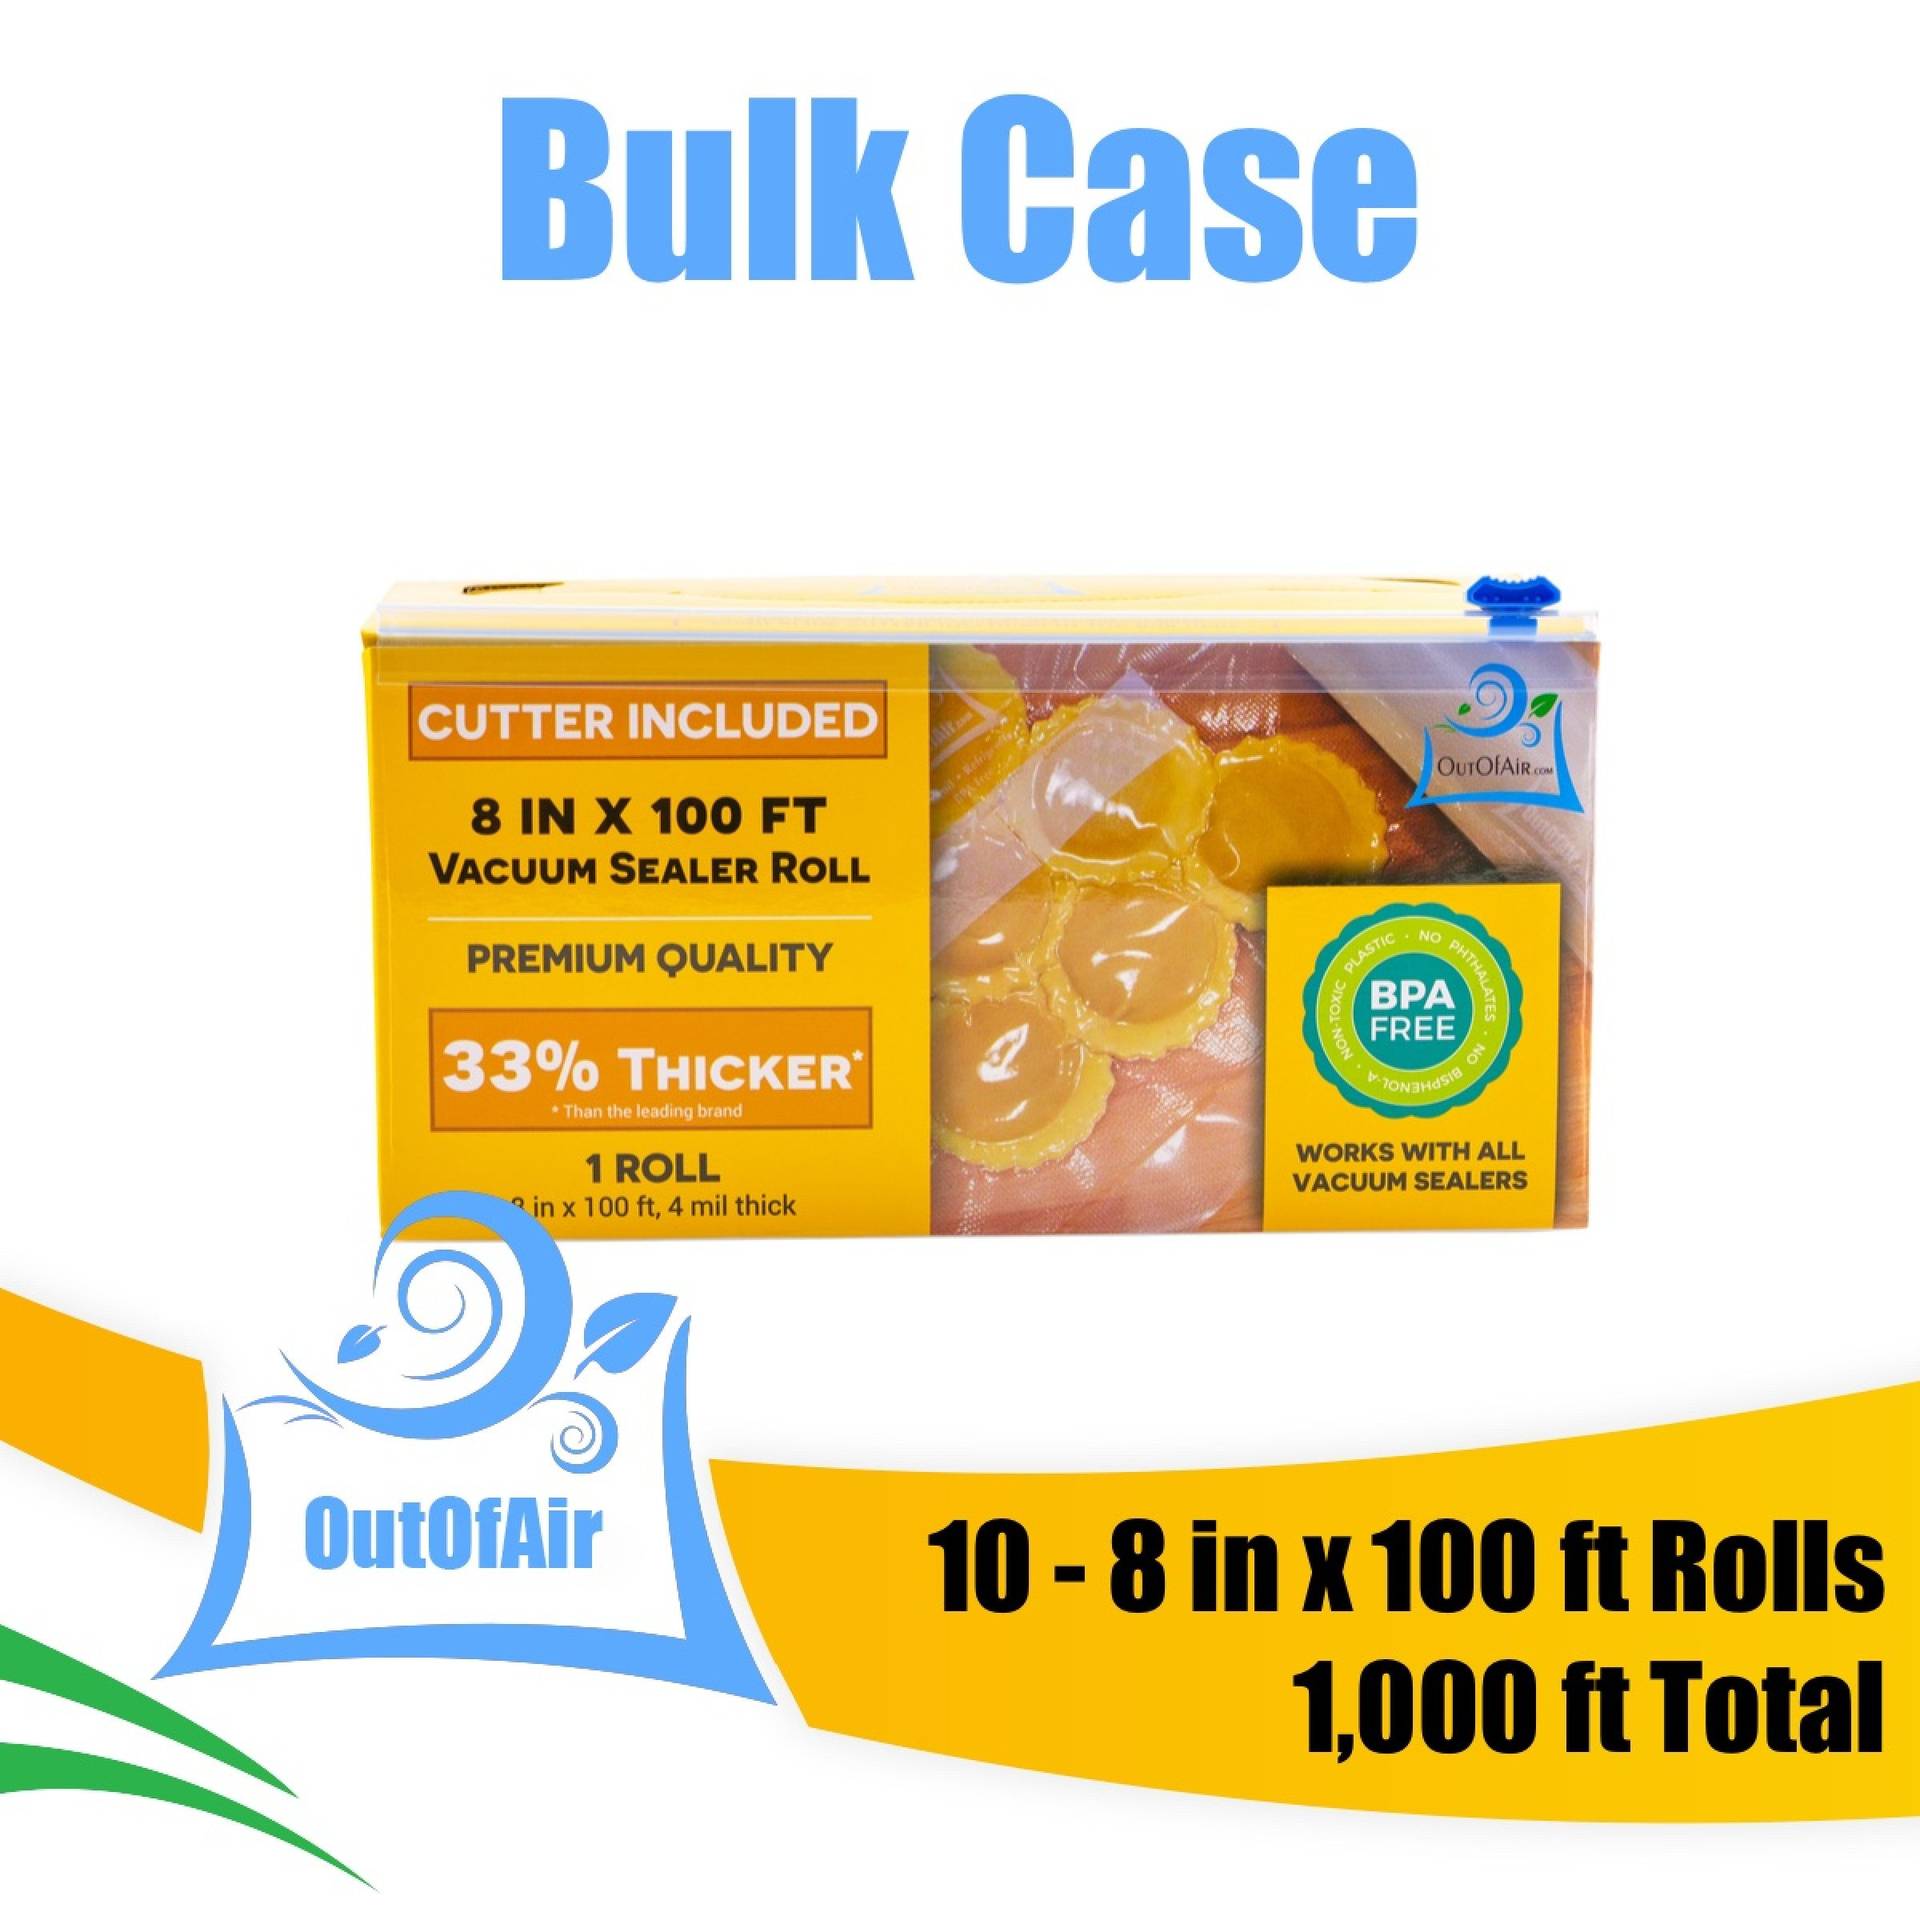 8x100' Roll Vacuum Sealer Bags with Box and Built in Bag Cutter - 10 Rolls  Bulk Case - OutOfAir